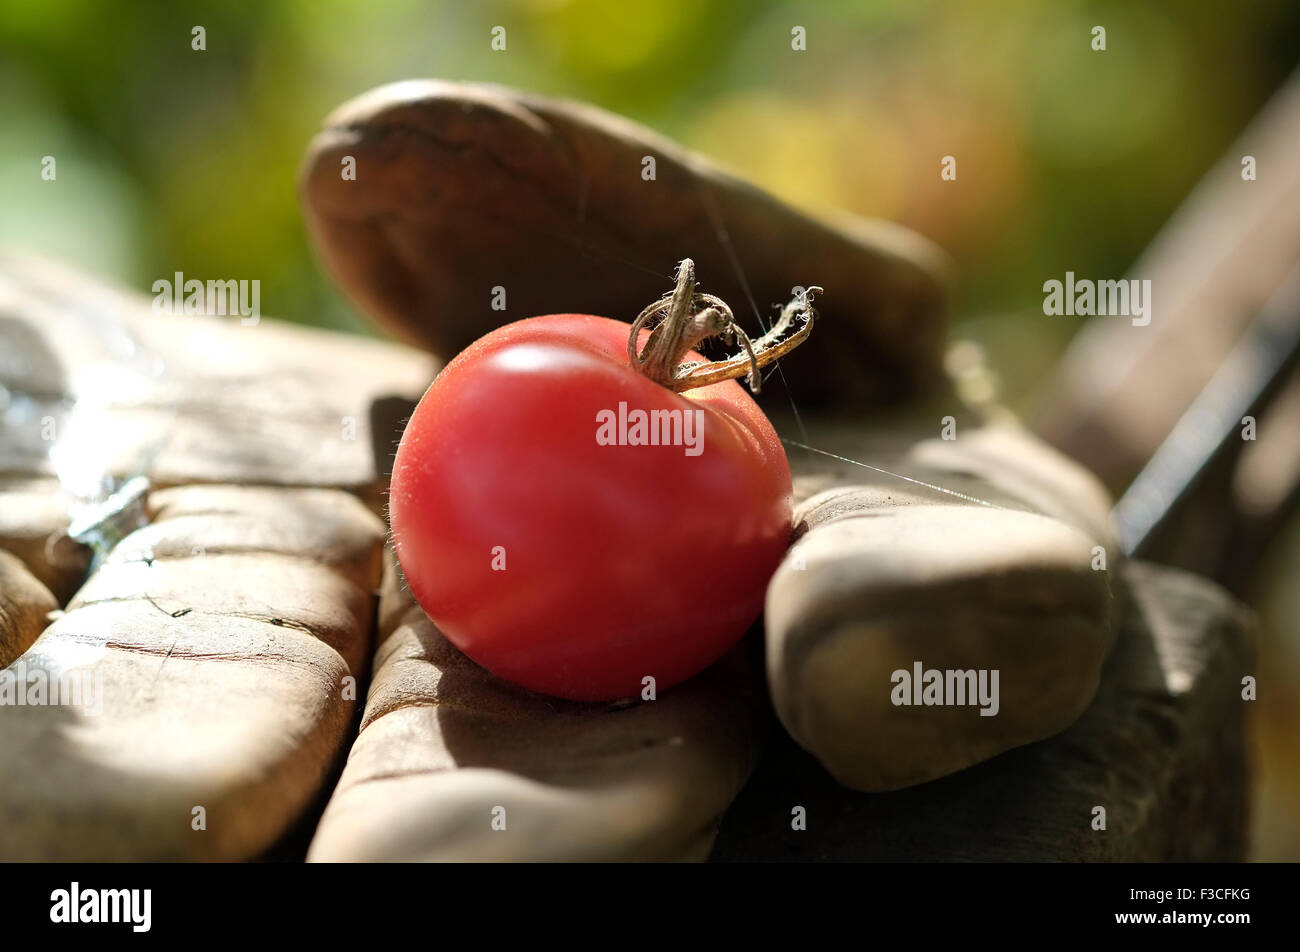 one red tomato on old garden glove in greenhouse Stock Photo